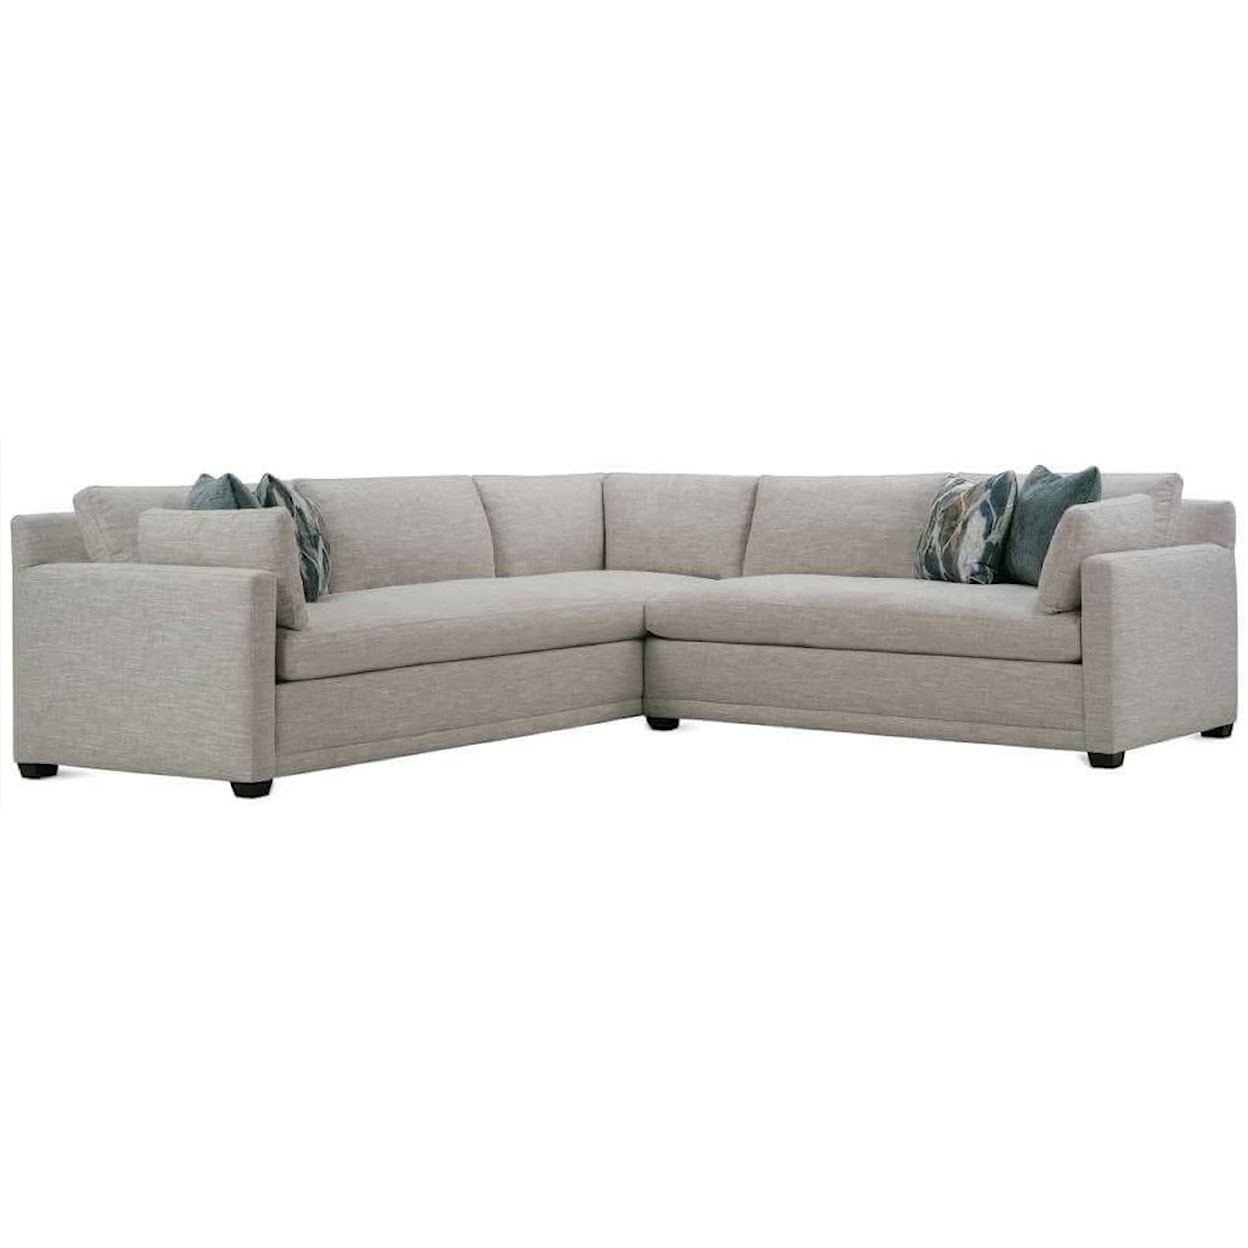 Rowe Sylvie Group Sylvie Two Piece Sectional